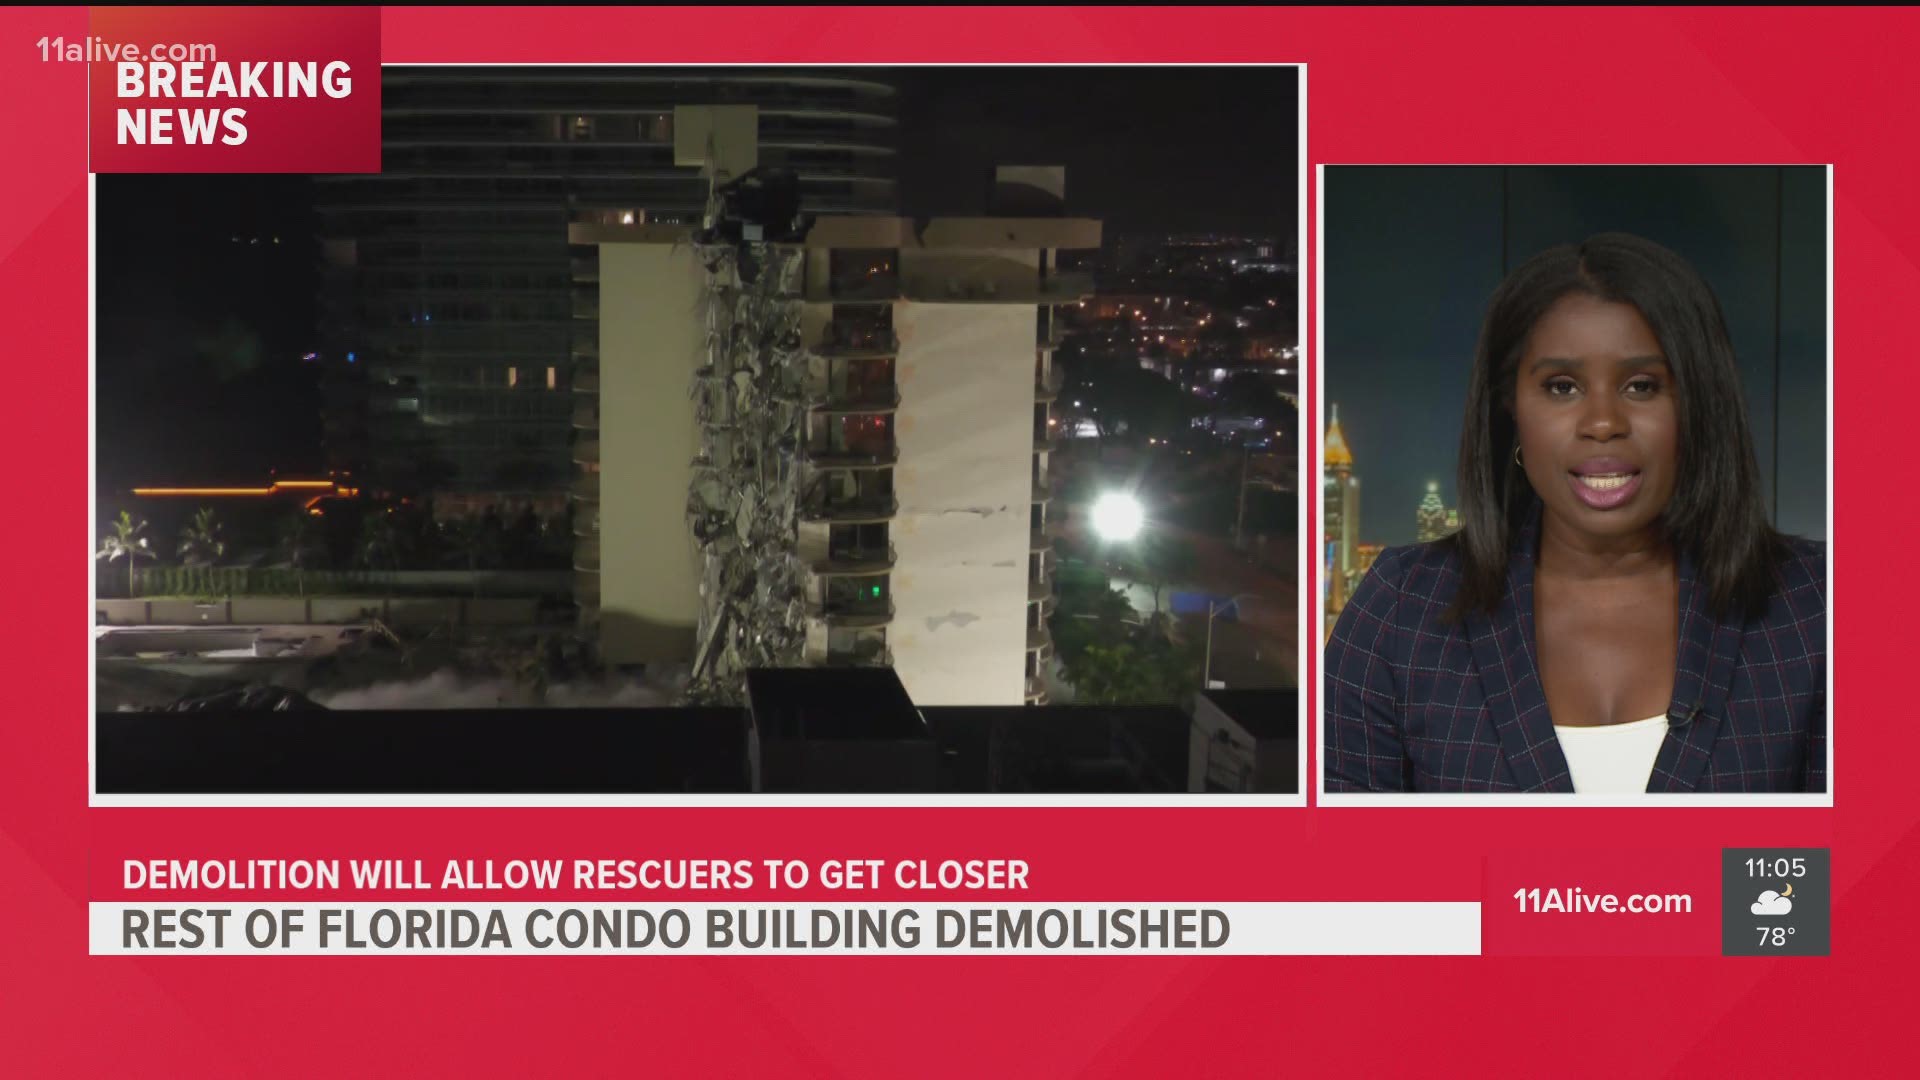 The remaining portion of the Champlain Towers South condo building in Surfside, Florida, was demolished just after 10:30 p.m. Sunday.